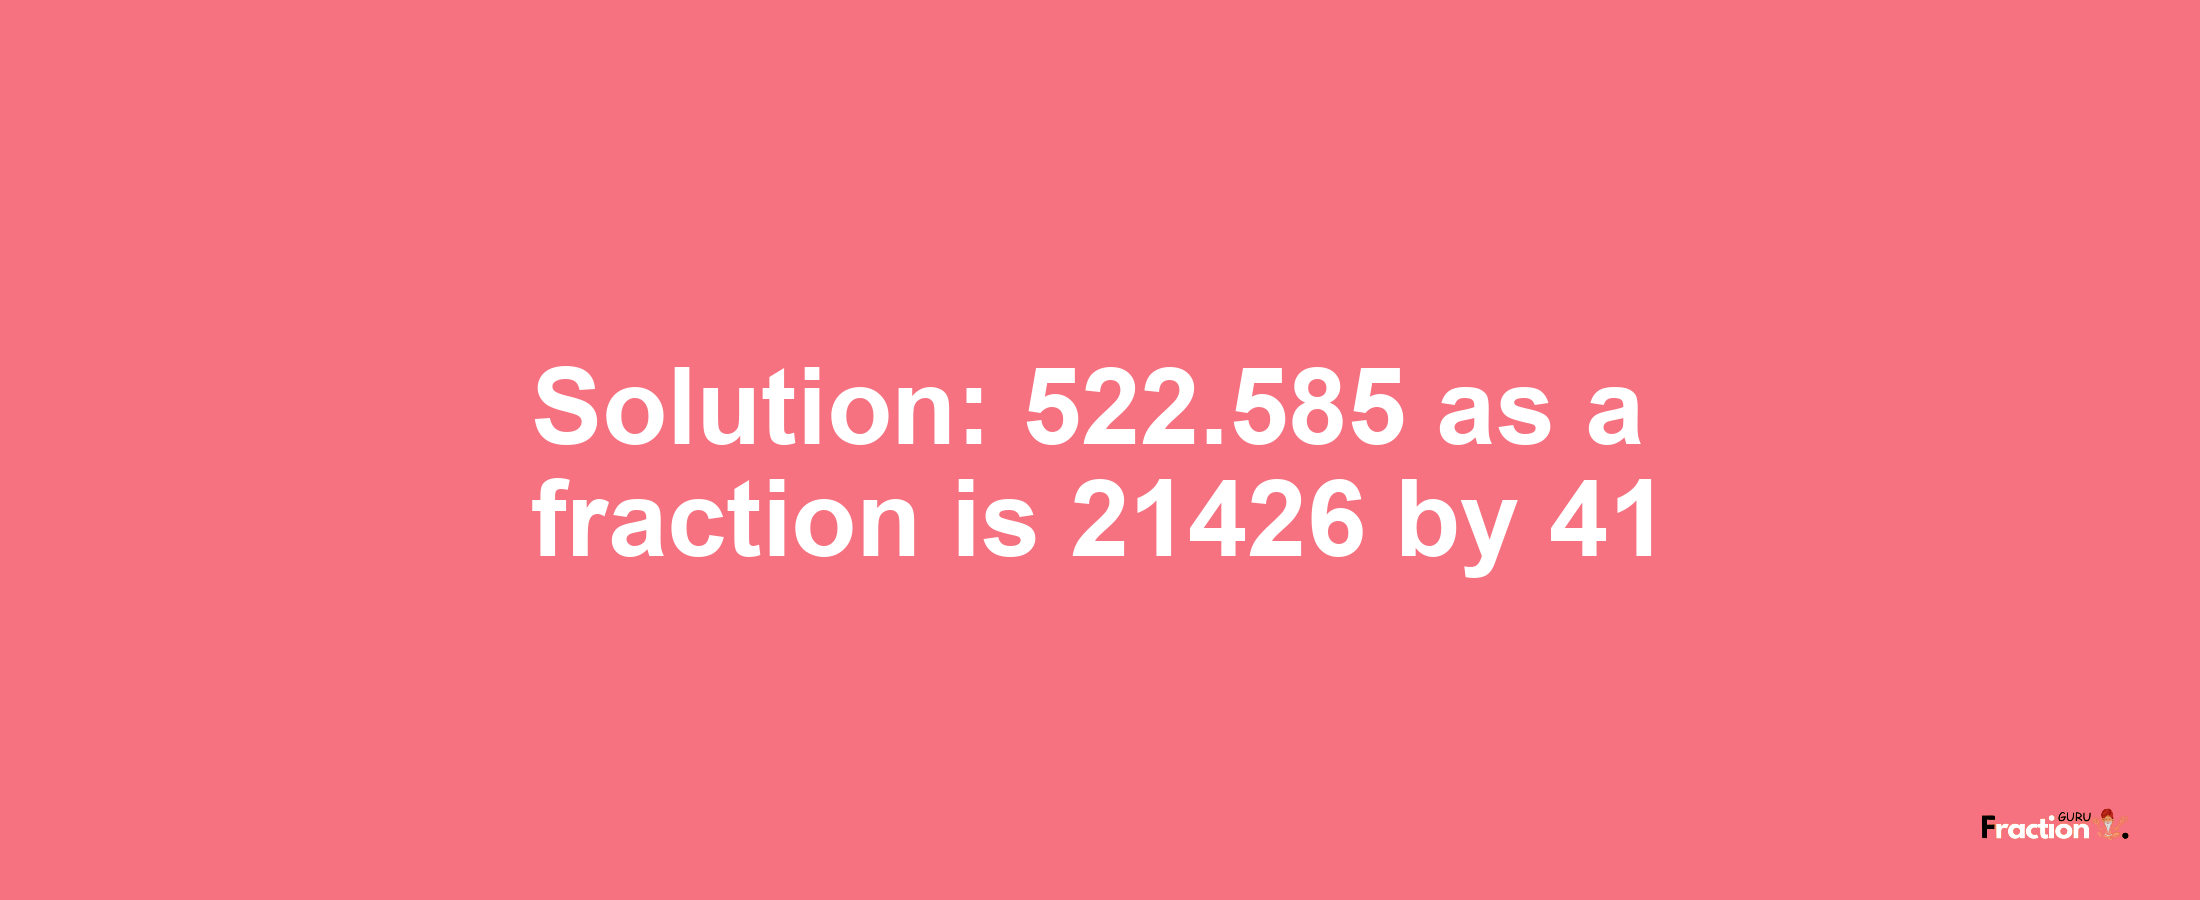 Solution:522.585 as a fraction is 21426/41